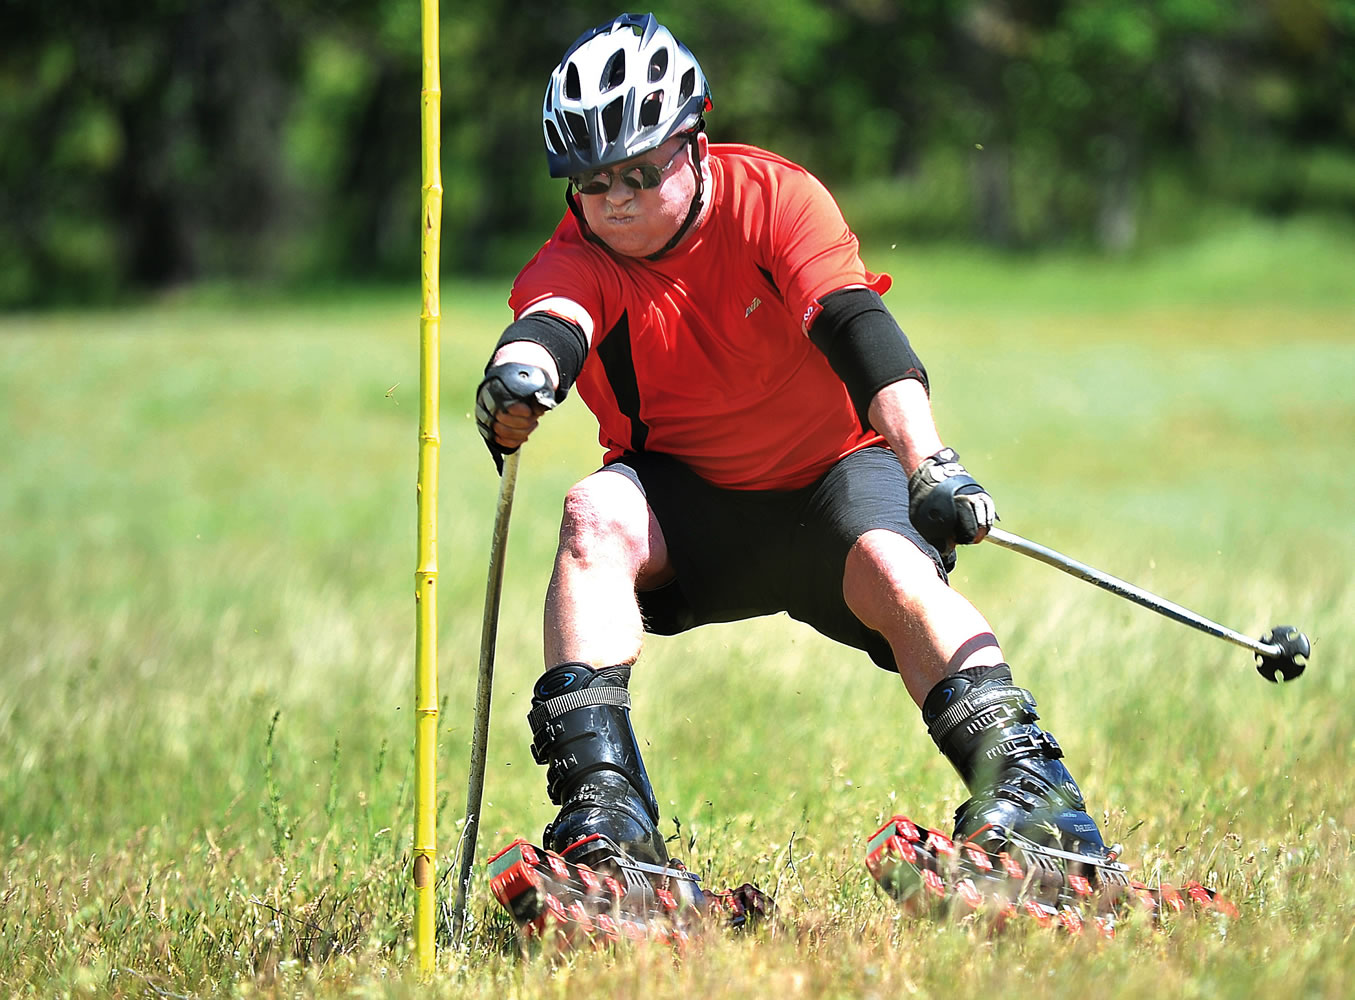 Brian McKay grass-skis down a slalom course that he set up at Emigrant Lake near Ashland, Ore., in May.